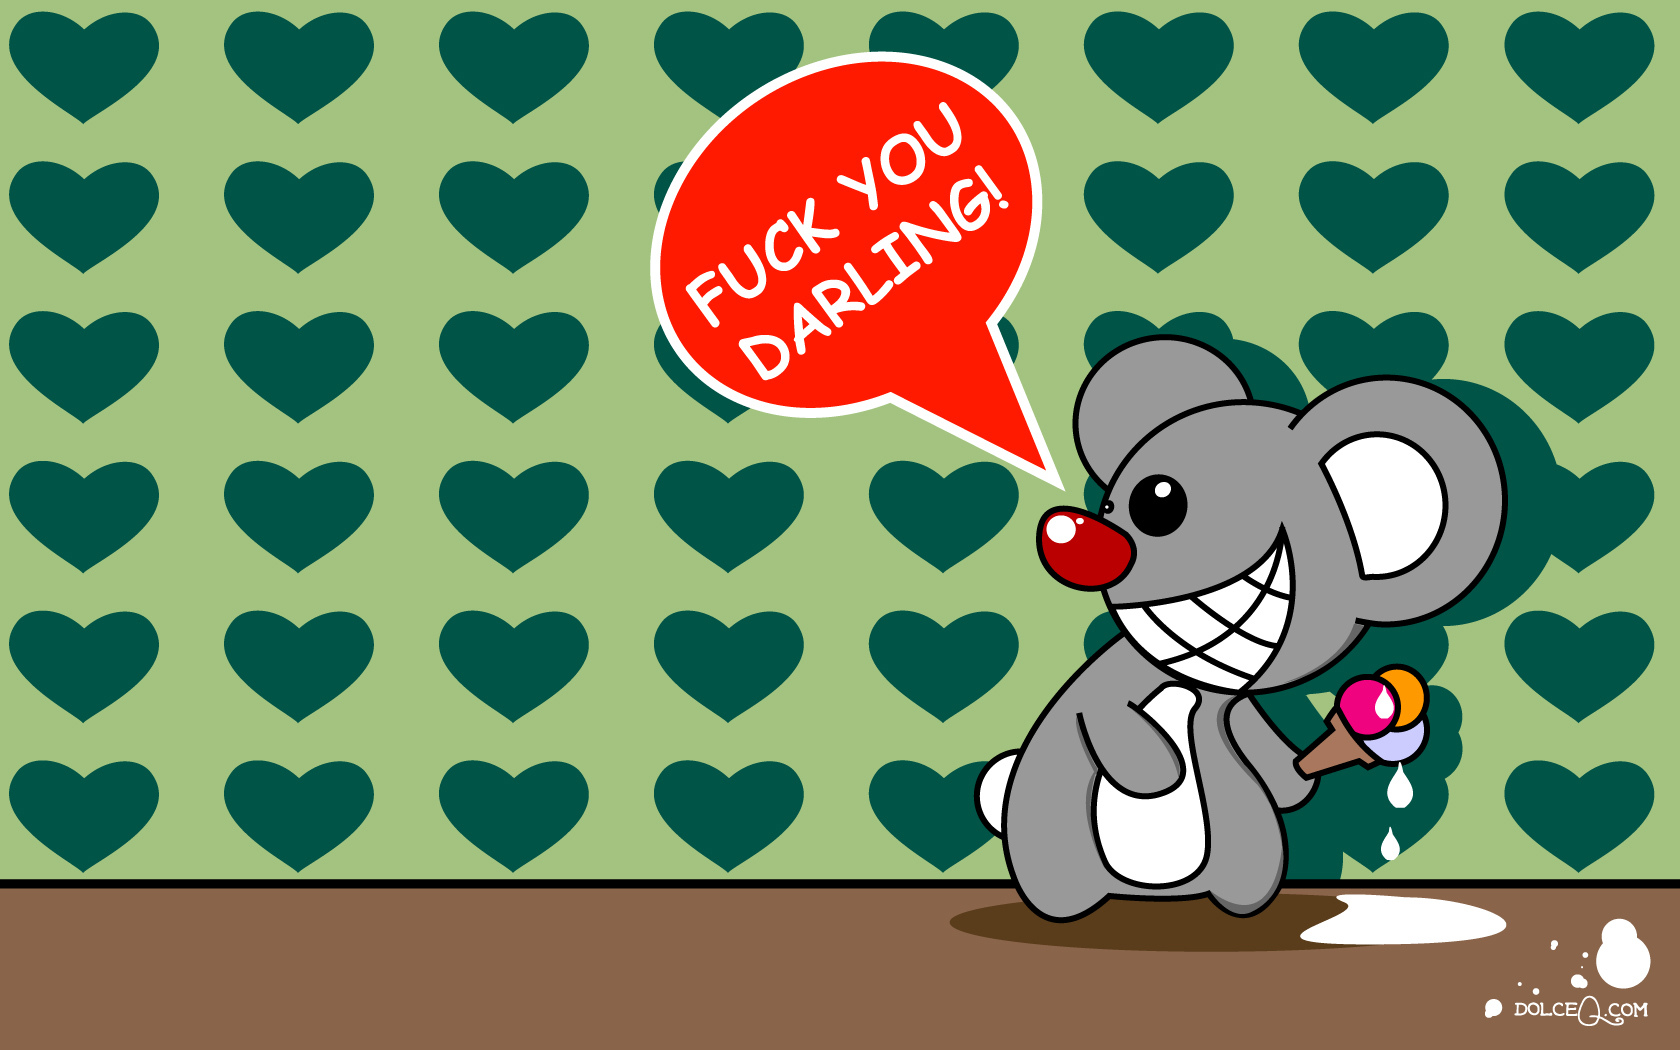 Previous, Drawn wallpapers - Bad mouse wallpaper